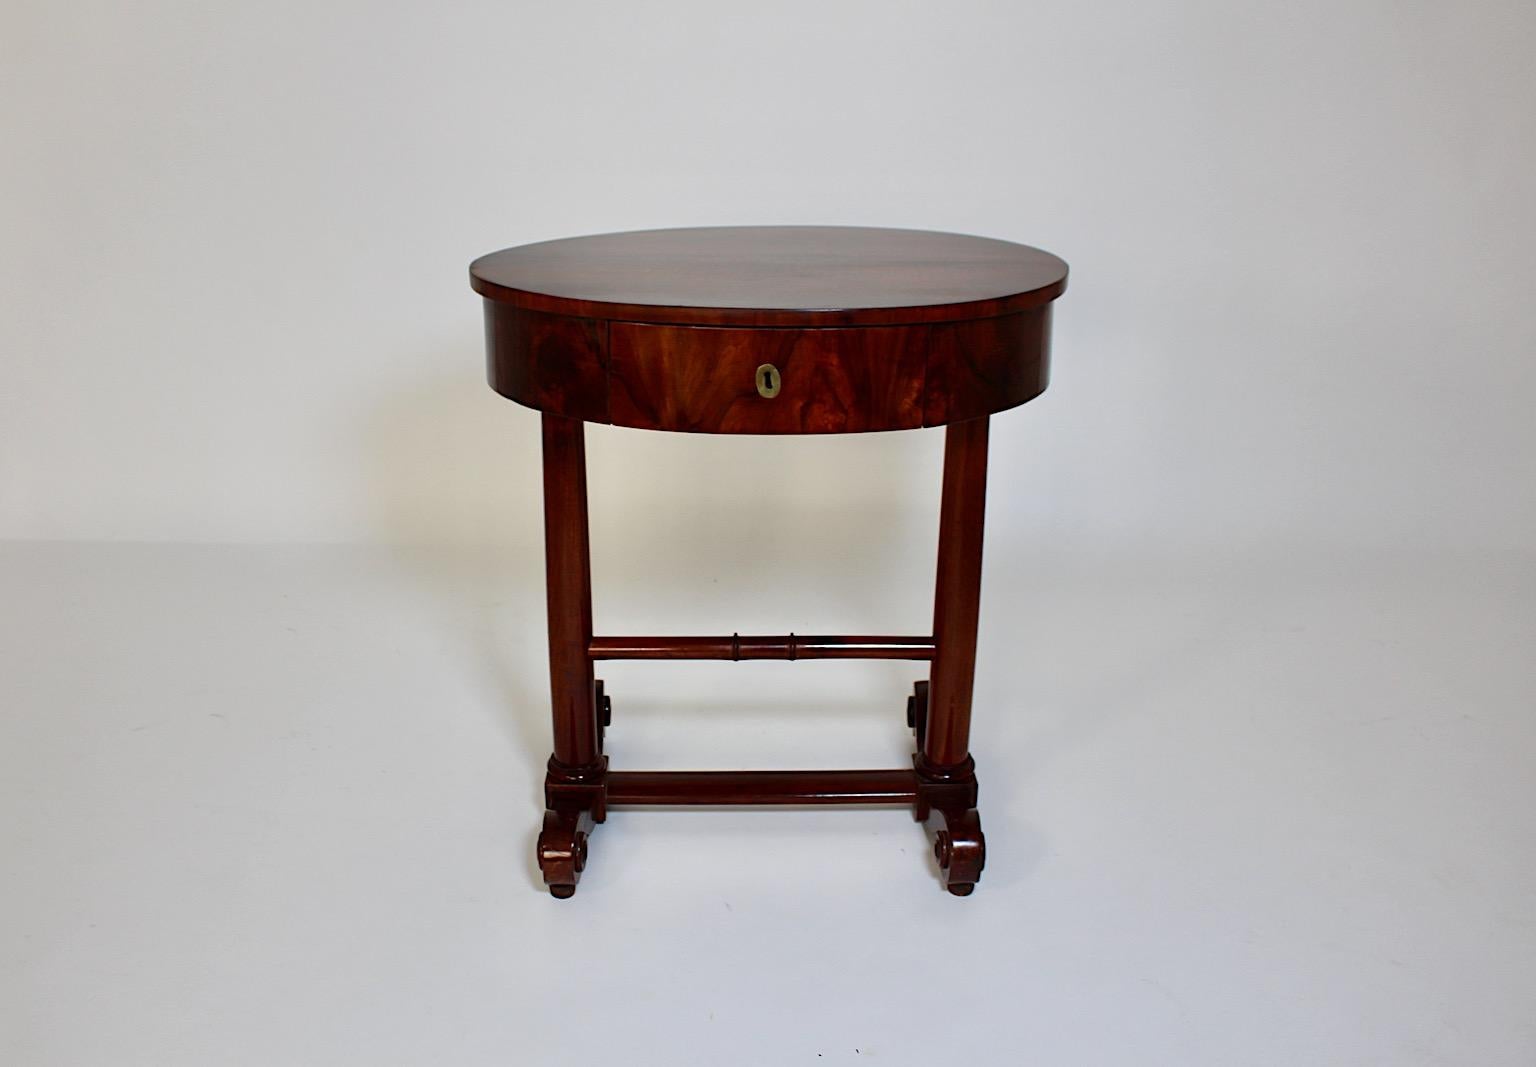 Biedermeier vintage side table or sewing table oval like from maple and walnut circa 1825 Vienna.
An elegant authentic Biedermeier side table or sewing table in oval like form from maple and walnut with beautiful details like one lockable drawer